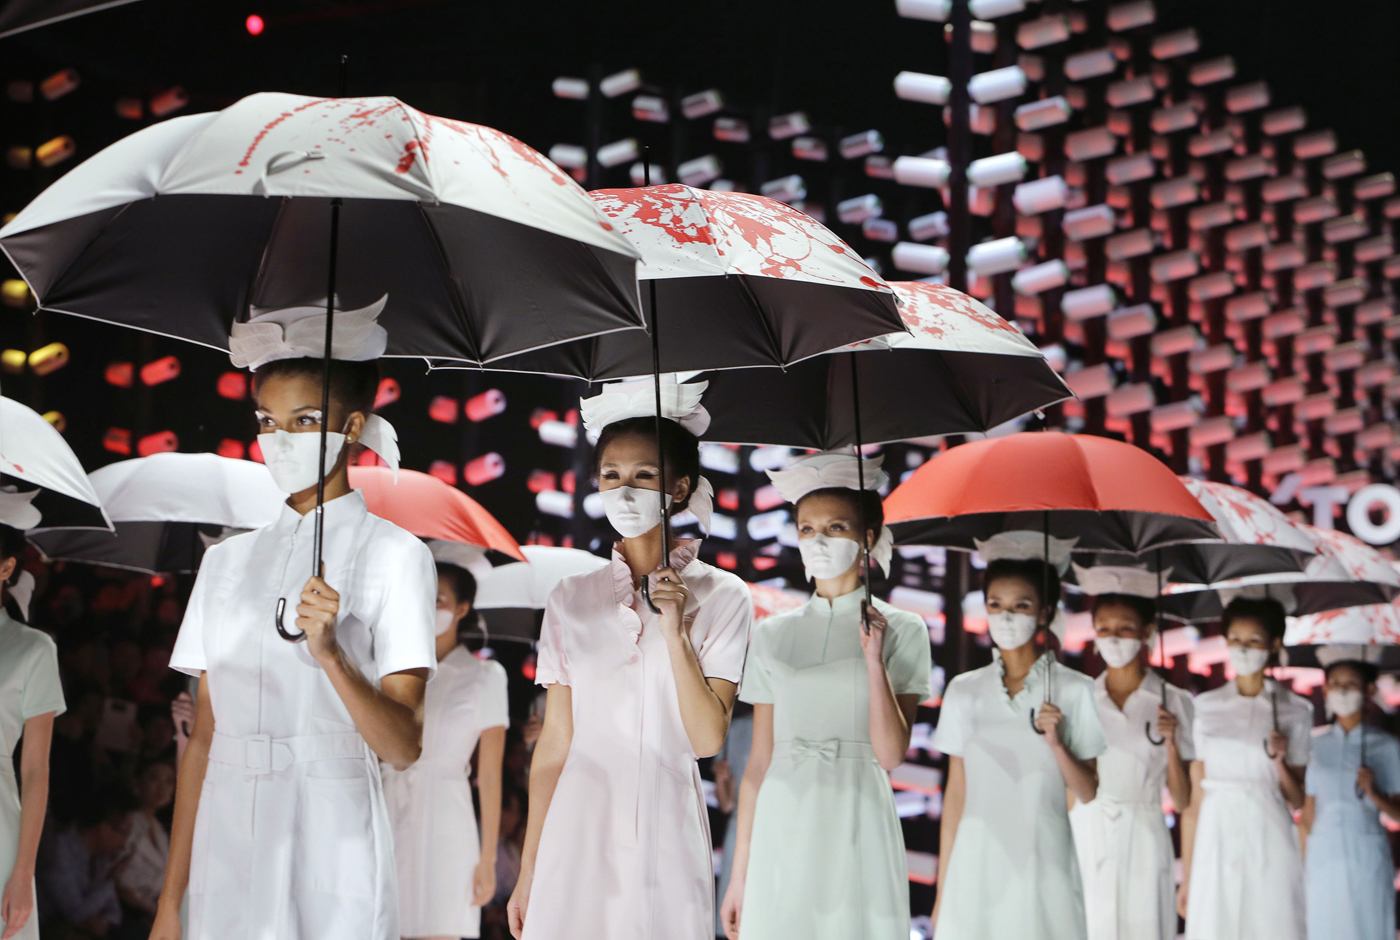 Models wearing masks hold umbrellas as they perform during the TORAY Liu Wei Collection segment at China Fashion Week in Beijing on Oct. 30.